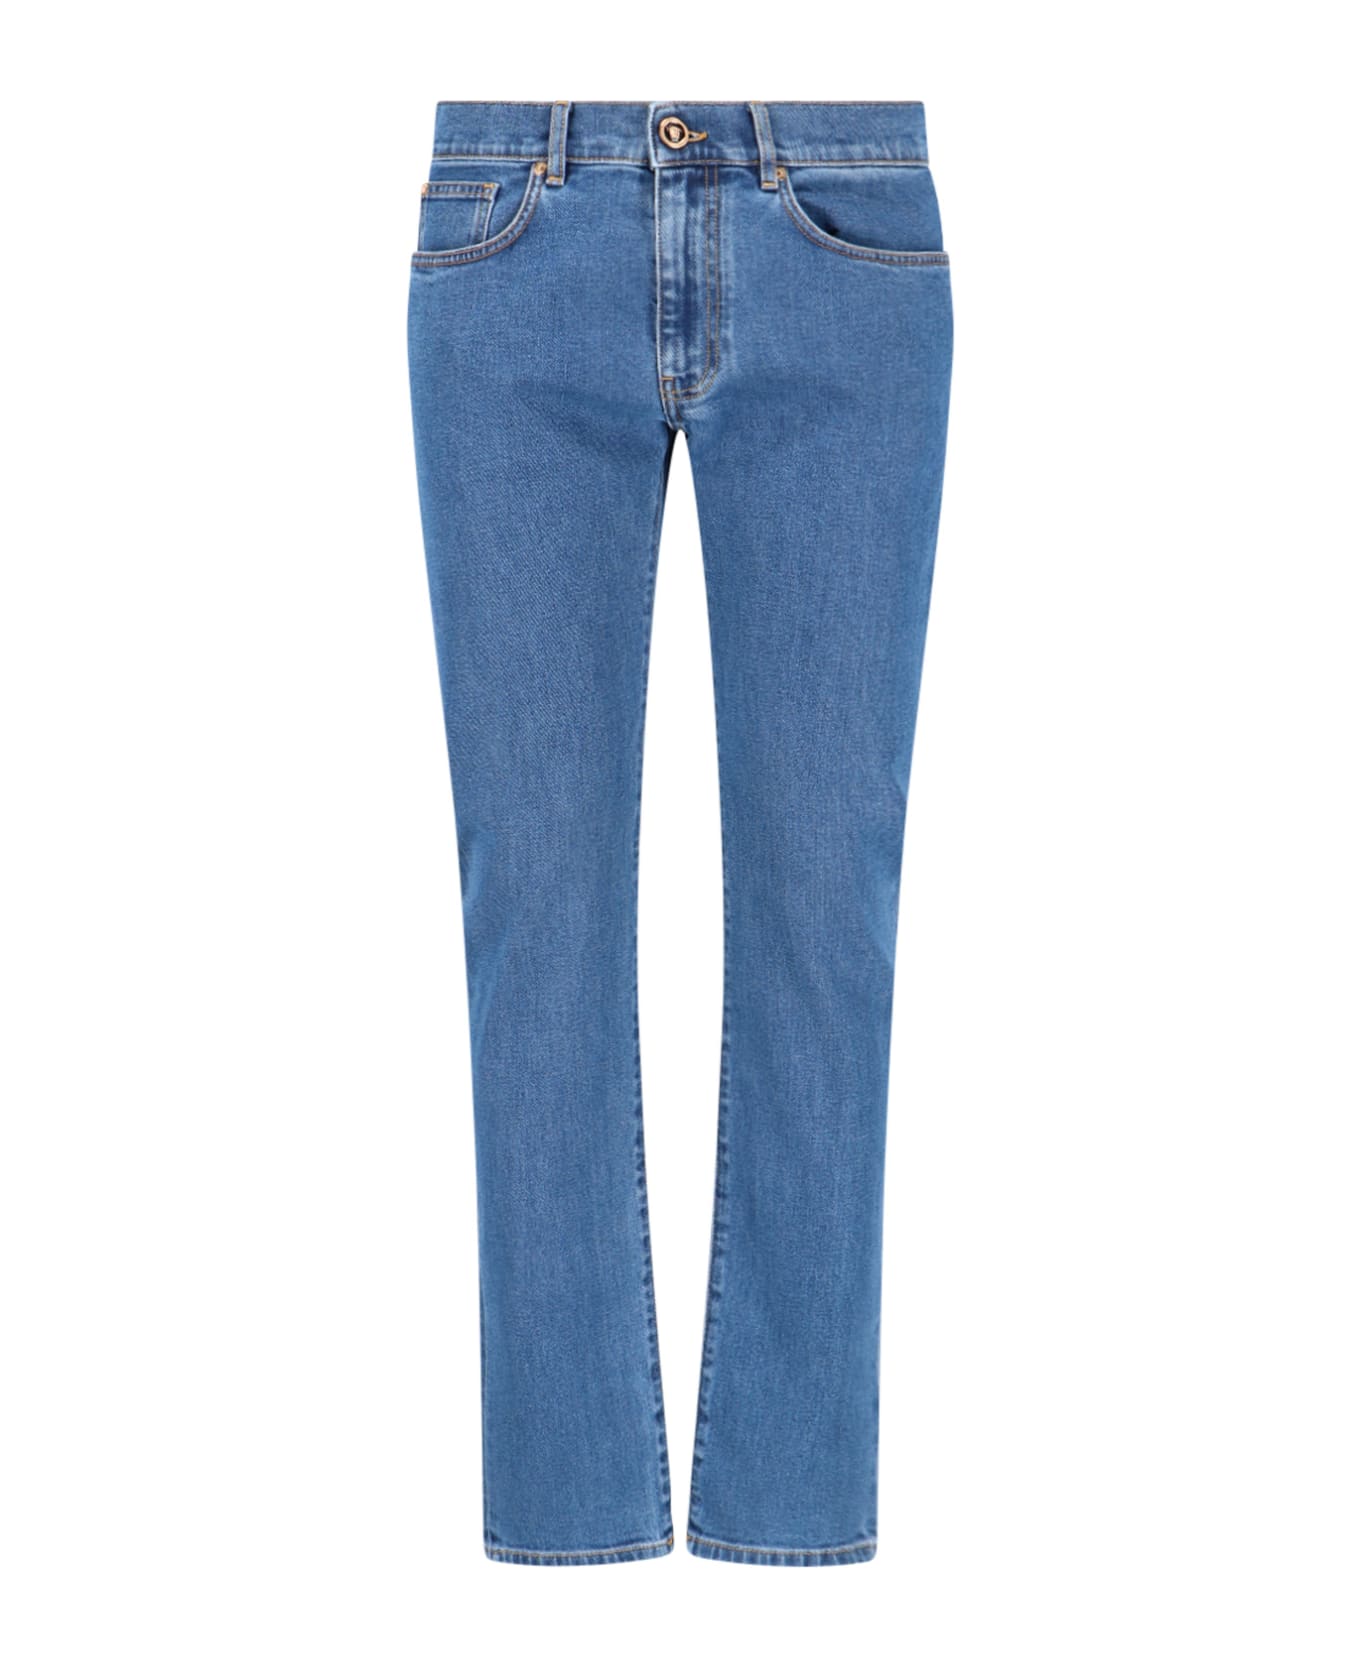 Versace Blue Fitted Jeans With Logo Embroidered And Botton In Cotton Blend Denim Woman - Blue デニム